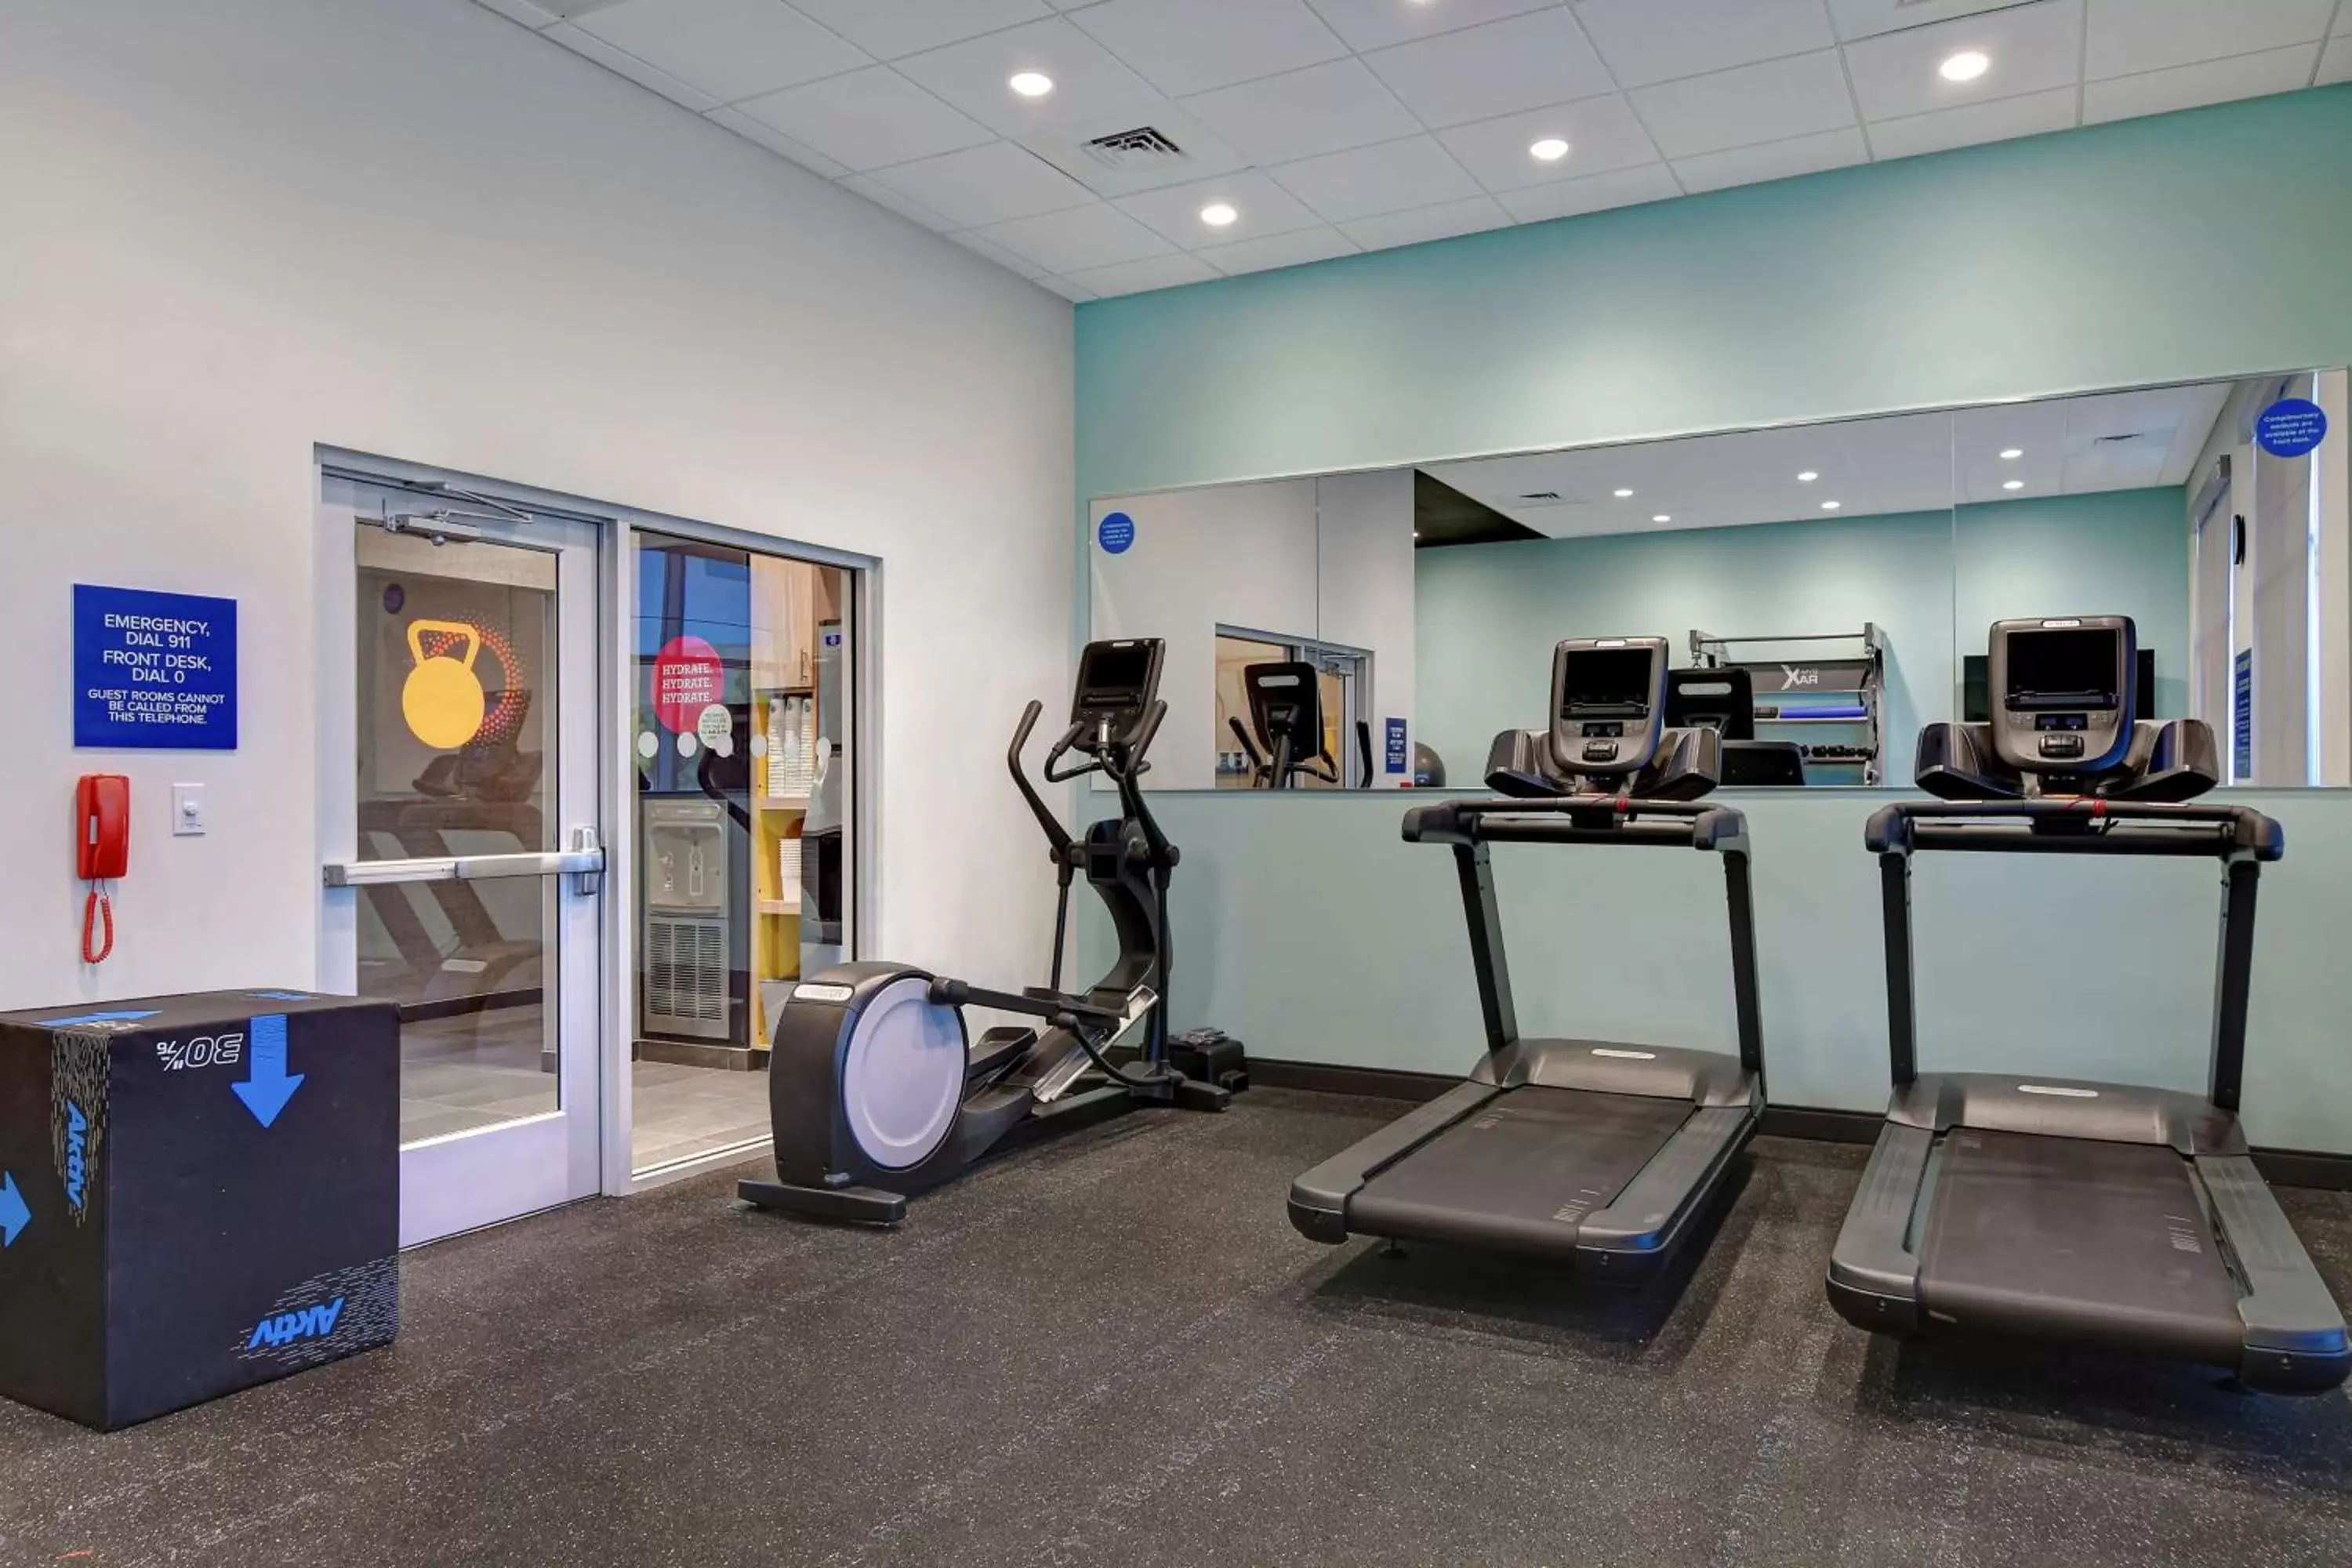 Fitness centre/facilities, Fitness Center/Facilities in Tru by Hilton Lithia Springs, GA